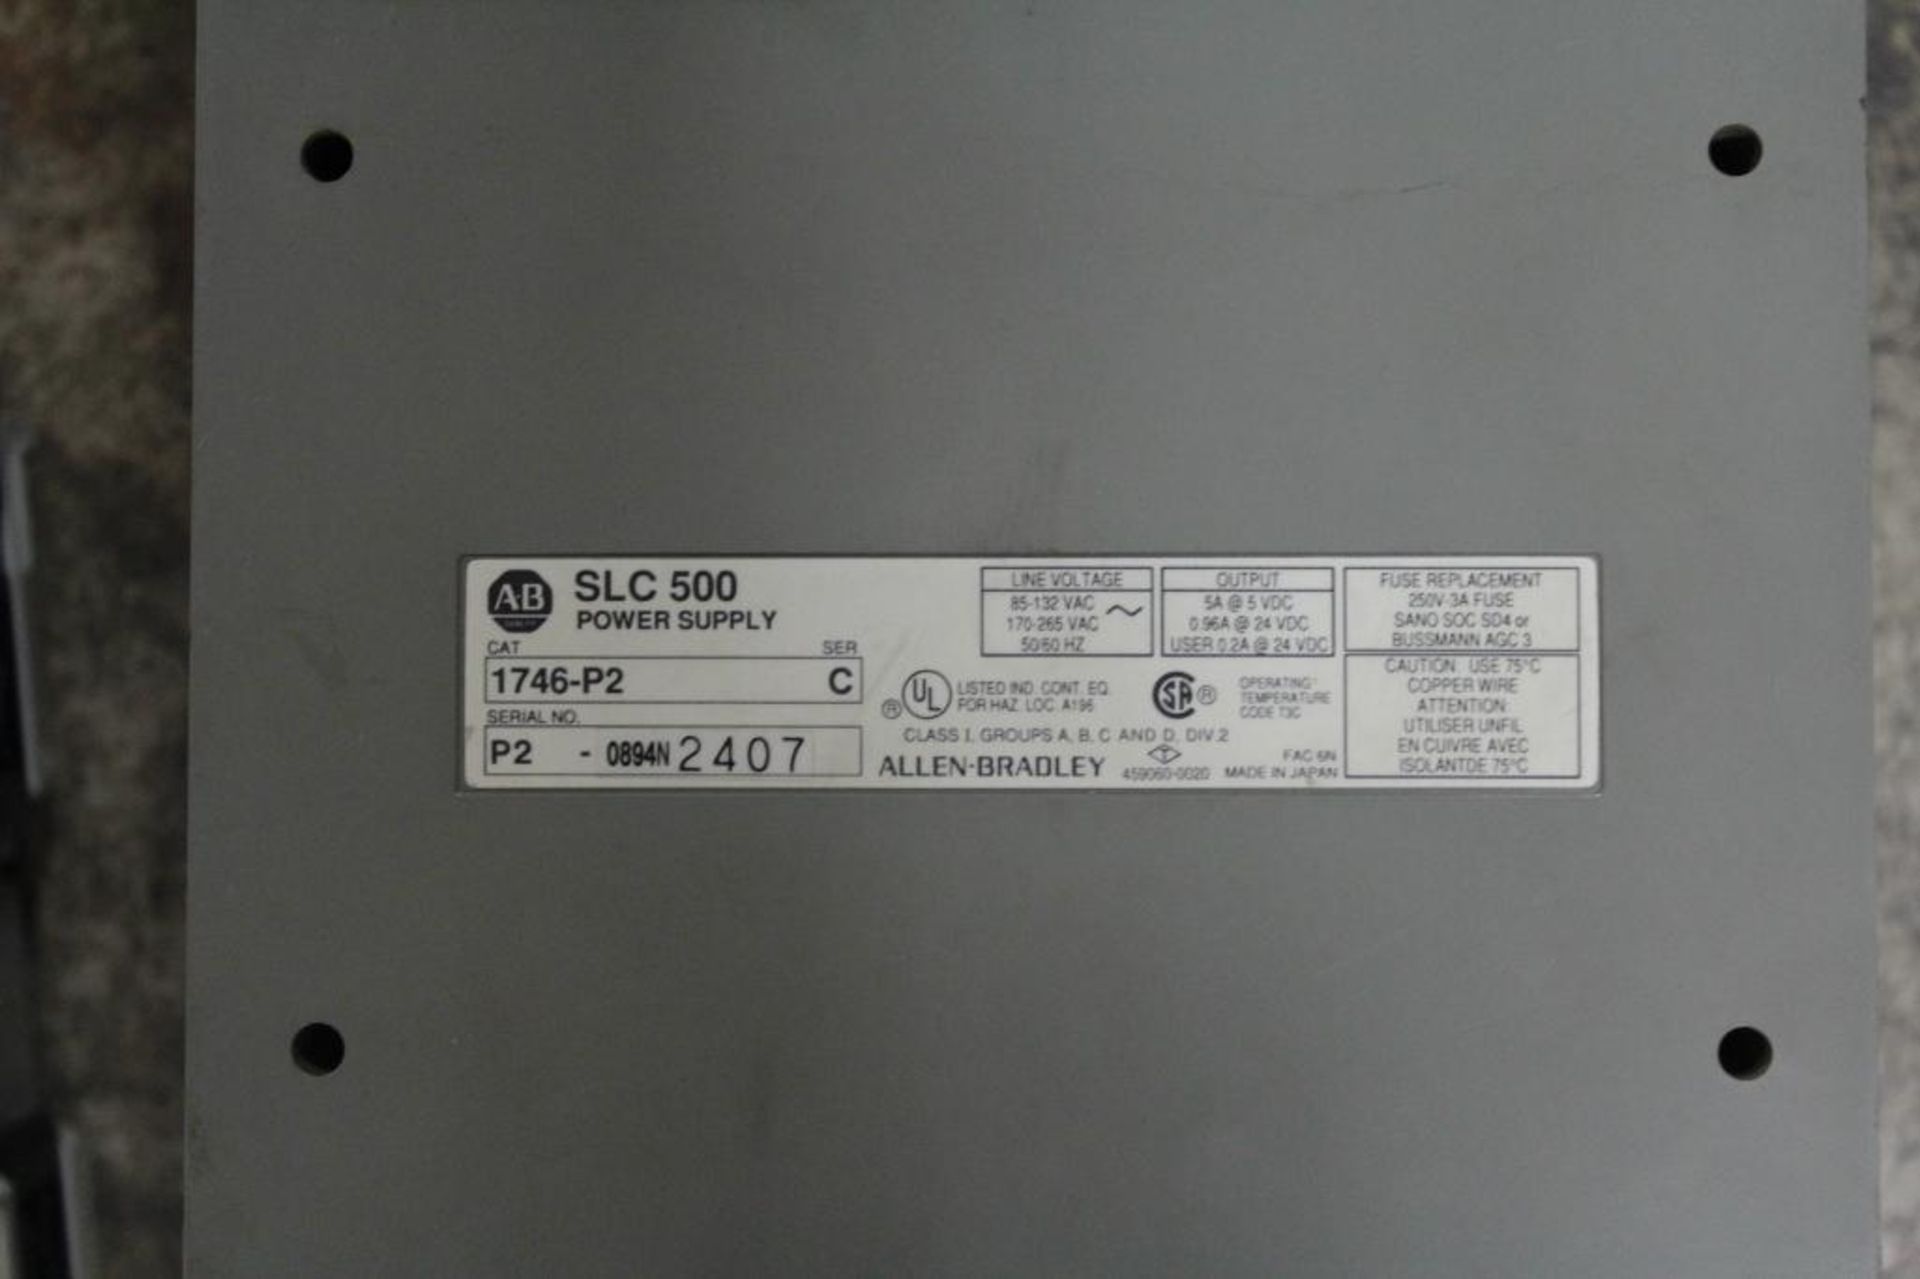 (Lot of 2) Allen-Bradley 1746-P2 & 1769-PA4 Power Supply (cosmetic damage to case) - Image 2 of 2